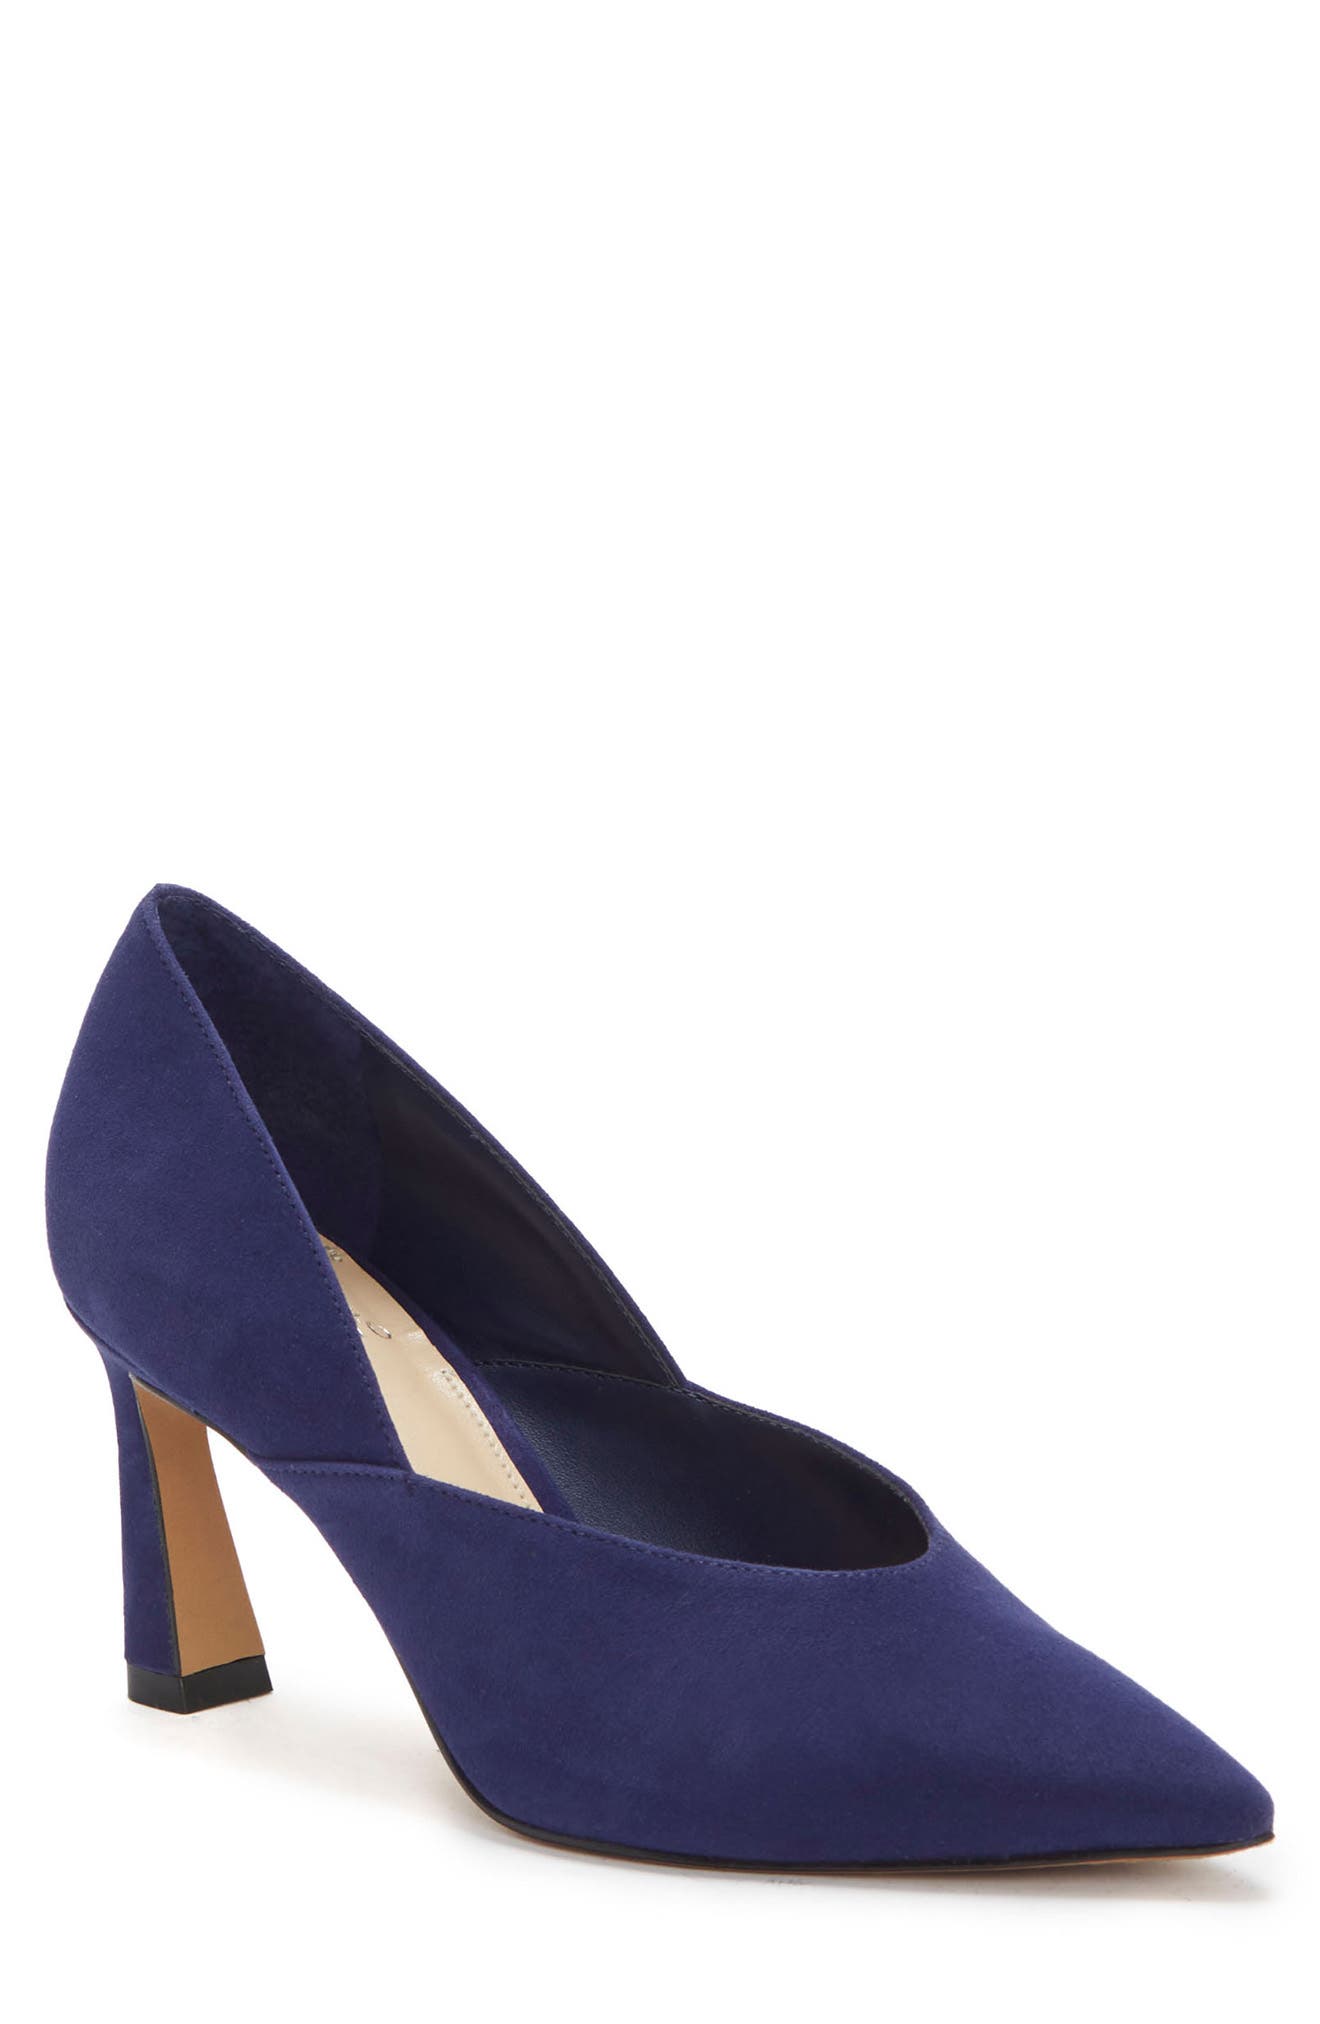 UPC 191707307445 product image for Vince Camuto Kastani Pointed Toe Pump in New Navy at Nordstrom, Size 9.5 | upcitemdb.com